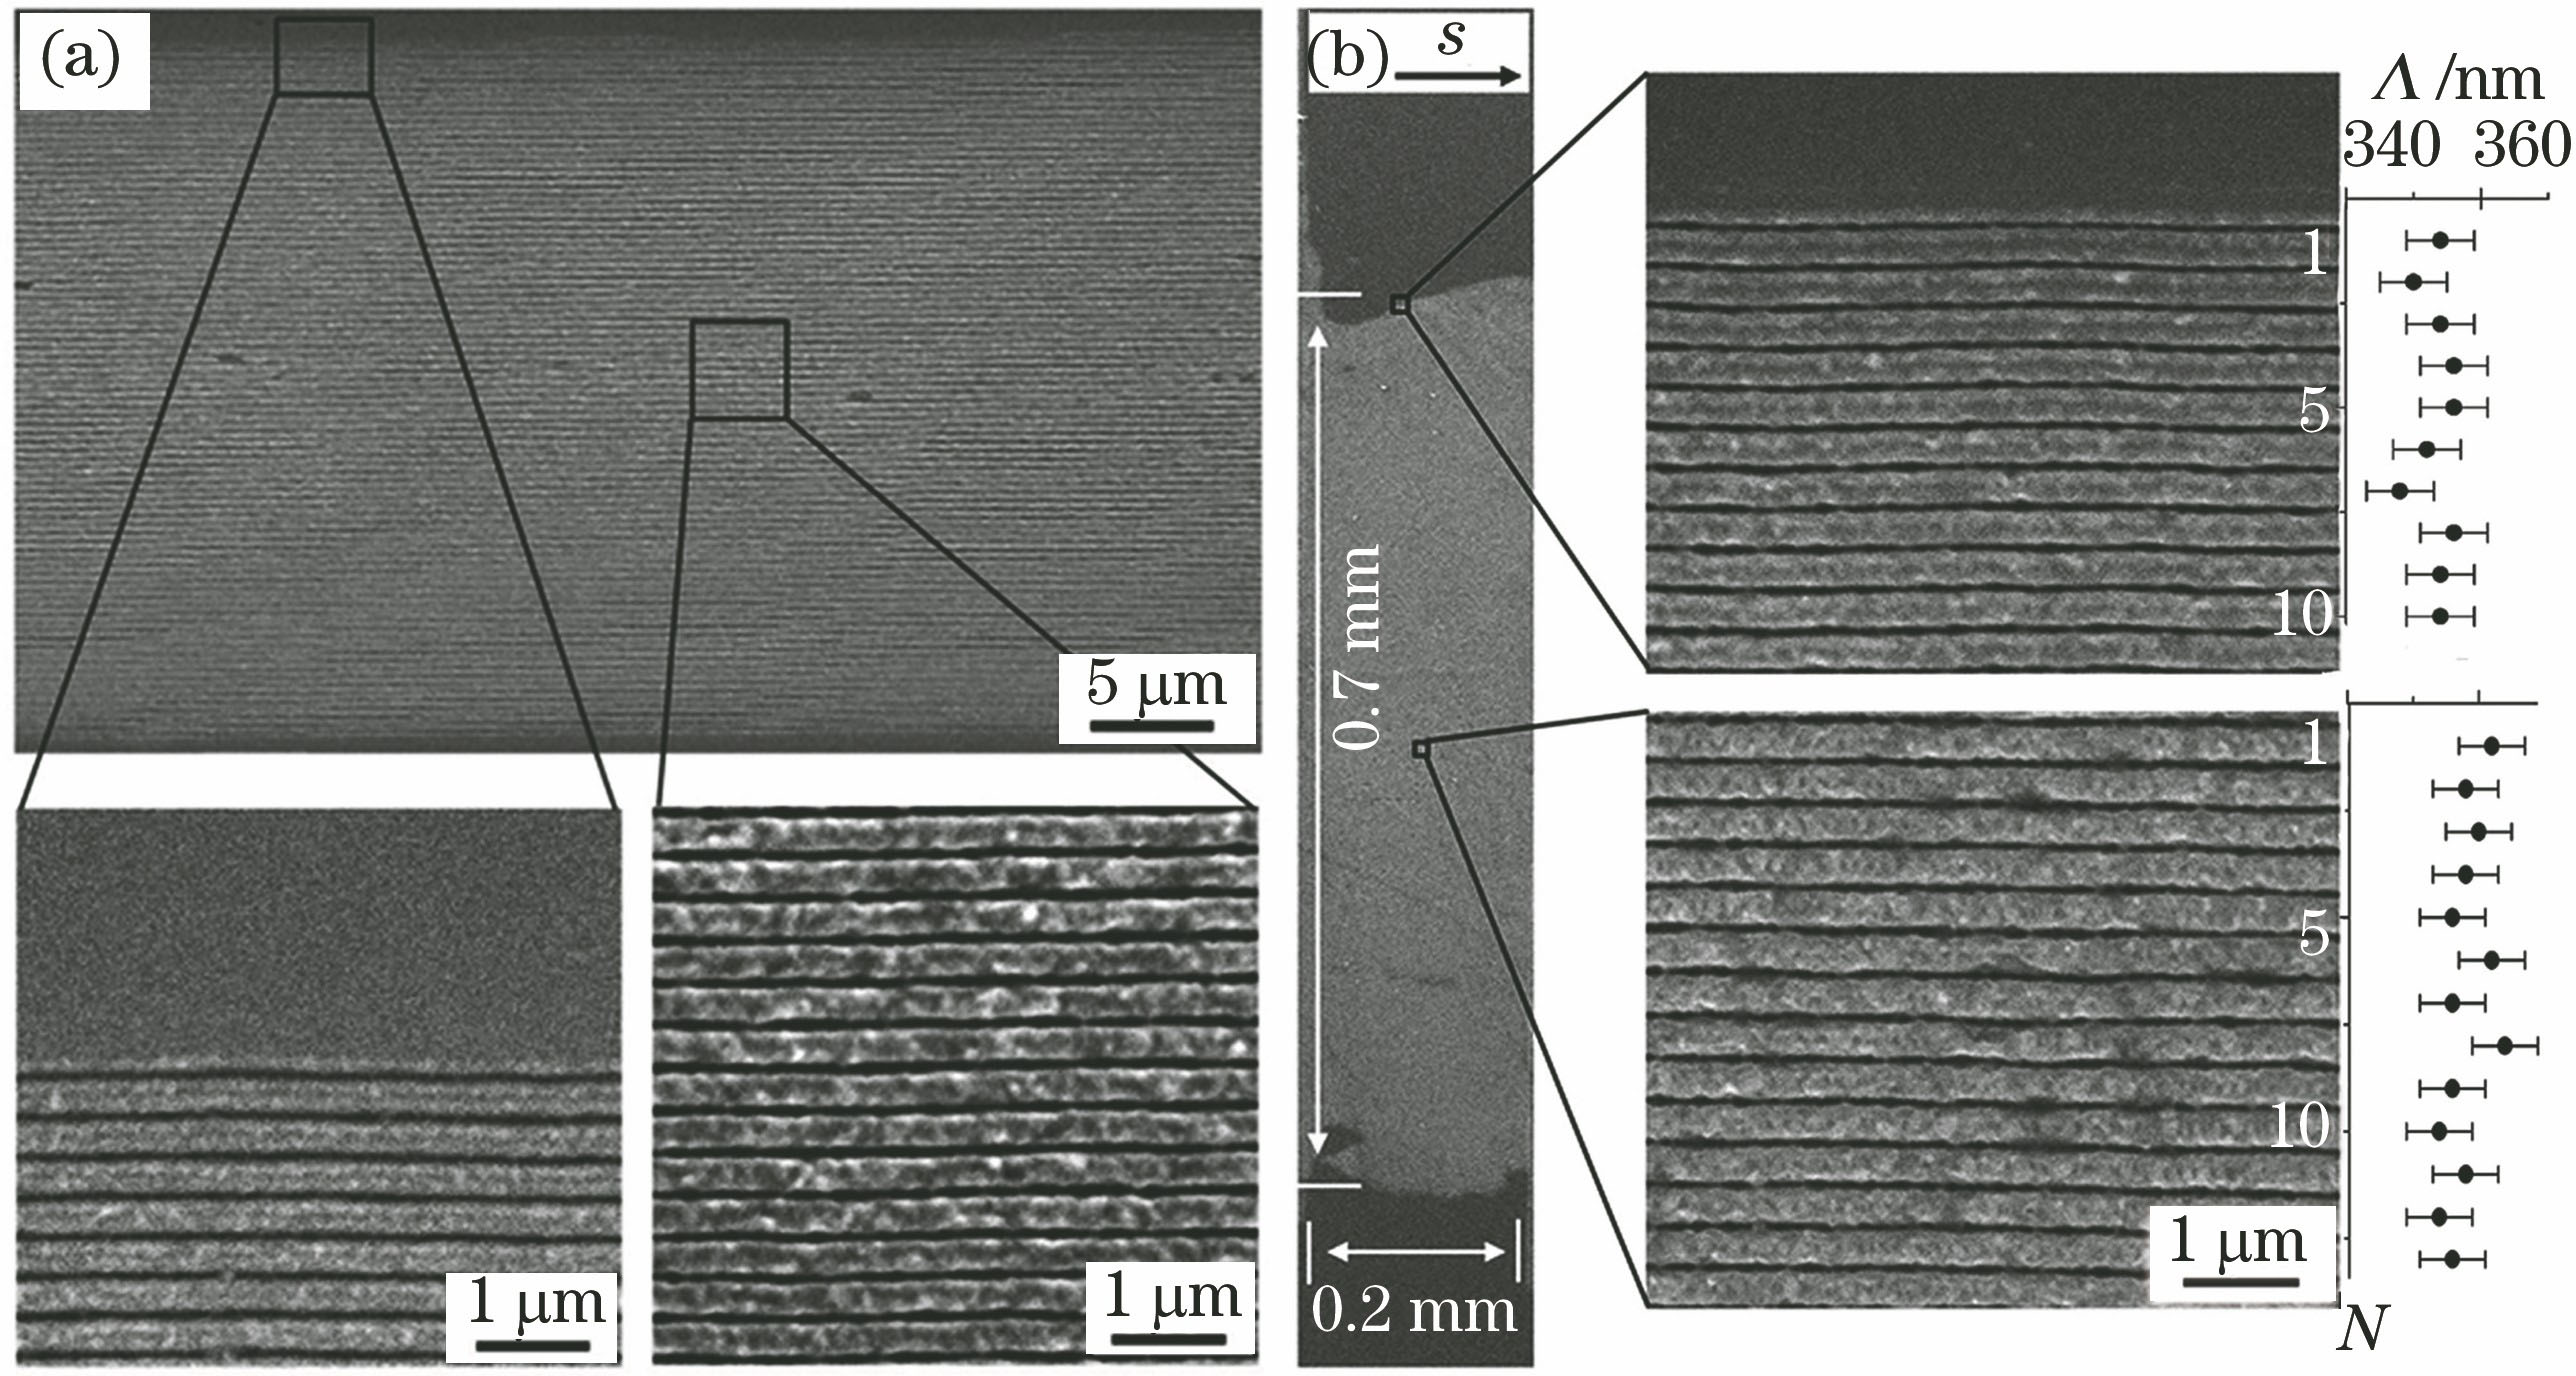 Highly regular one-dimensional periodic ripple structures on 25 nm Cr film by linearly polarized single-beam femtosecond laser beam under vacuum condition of 1.0×10-4 Pa[92]. (a) Focusing with a convex lens; (b) focusing with a cylindrical lens